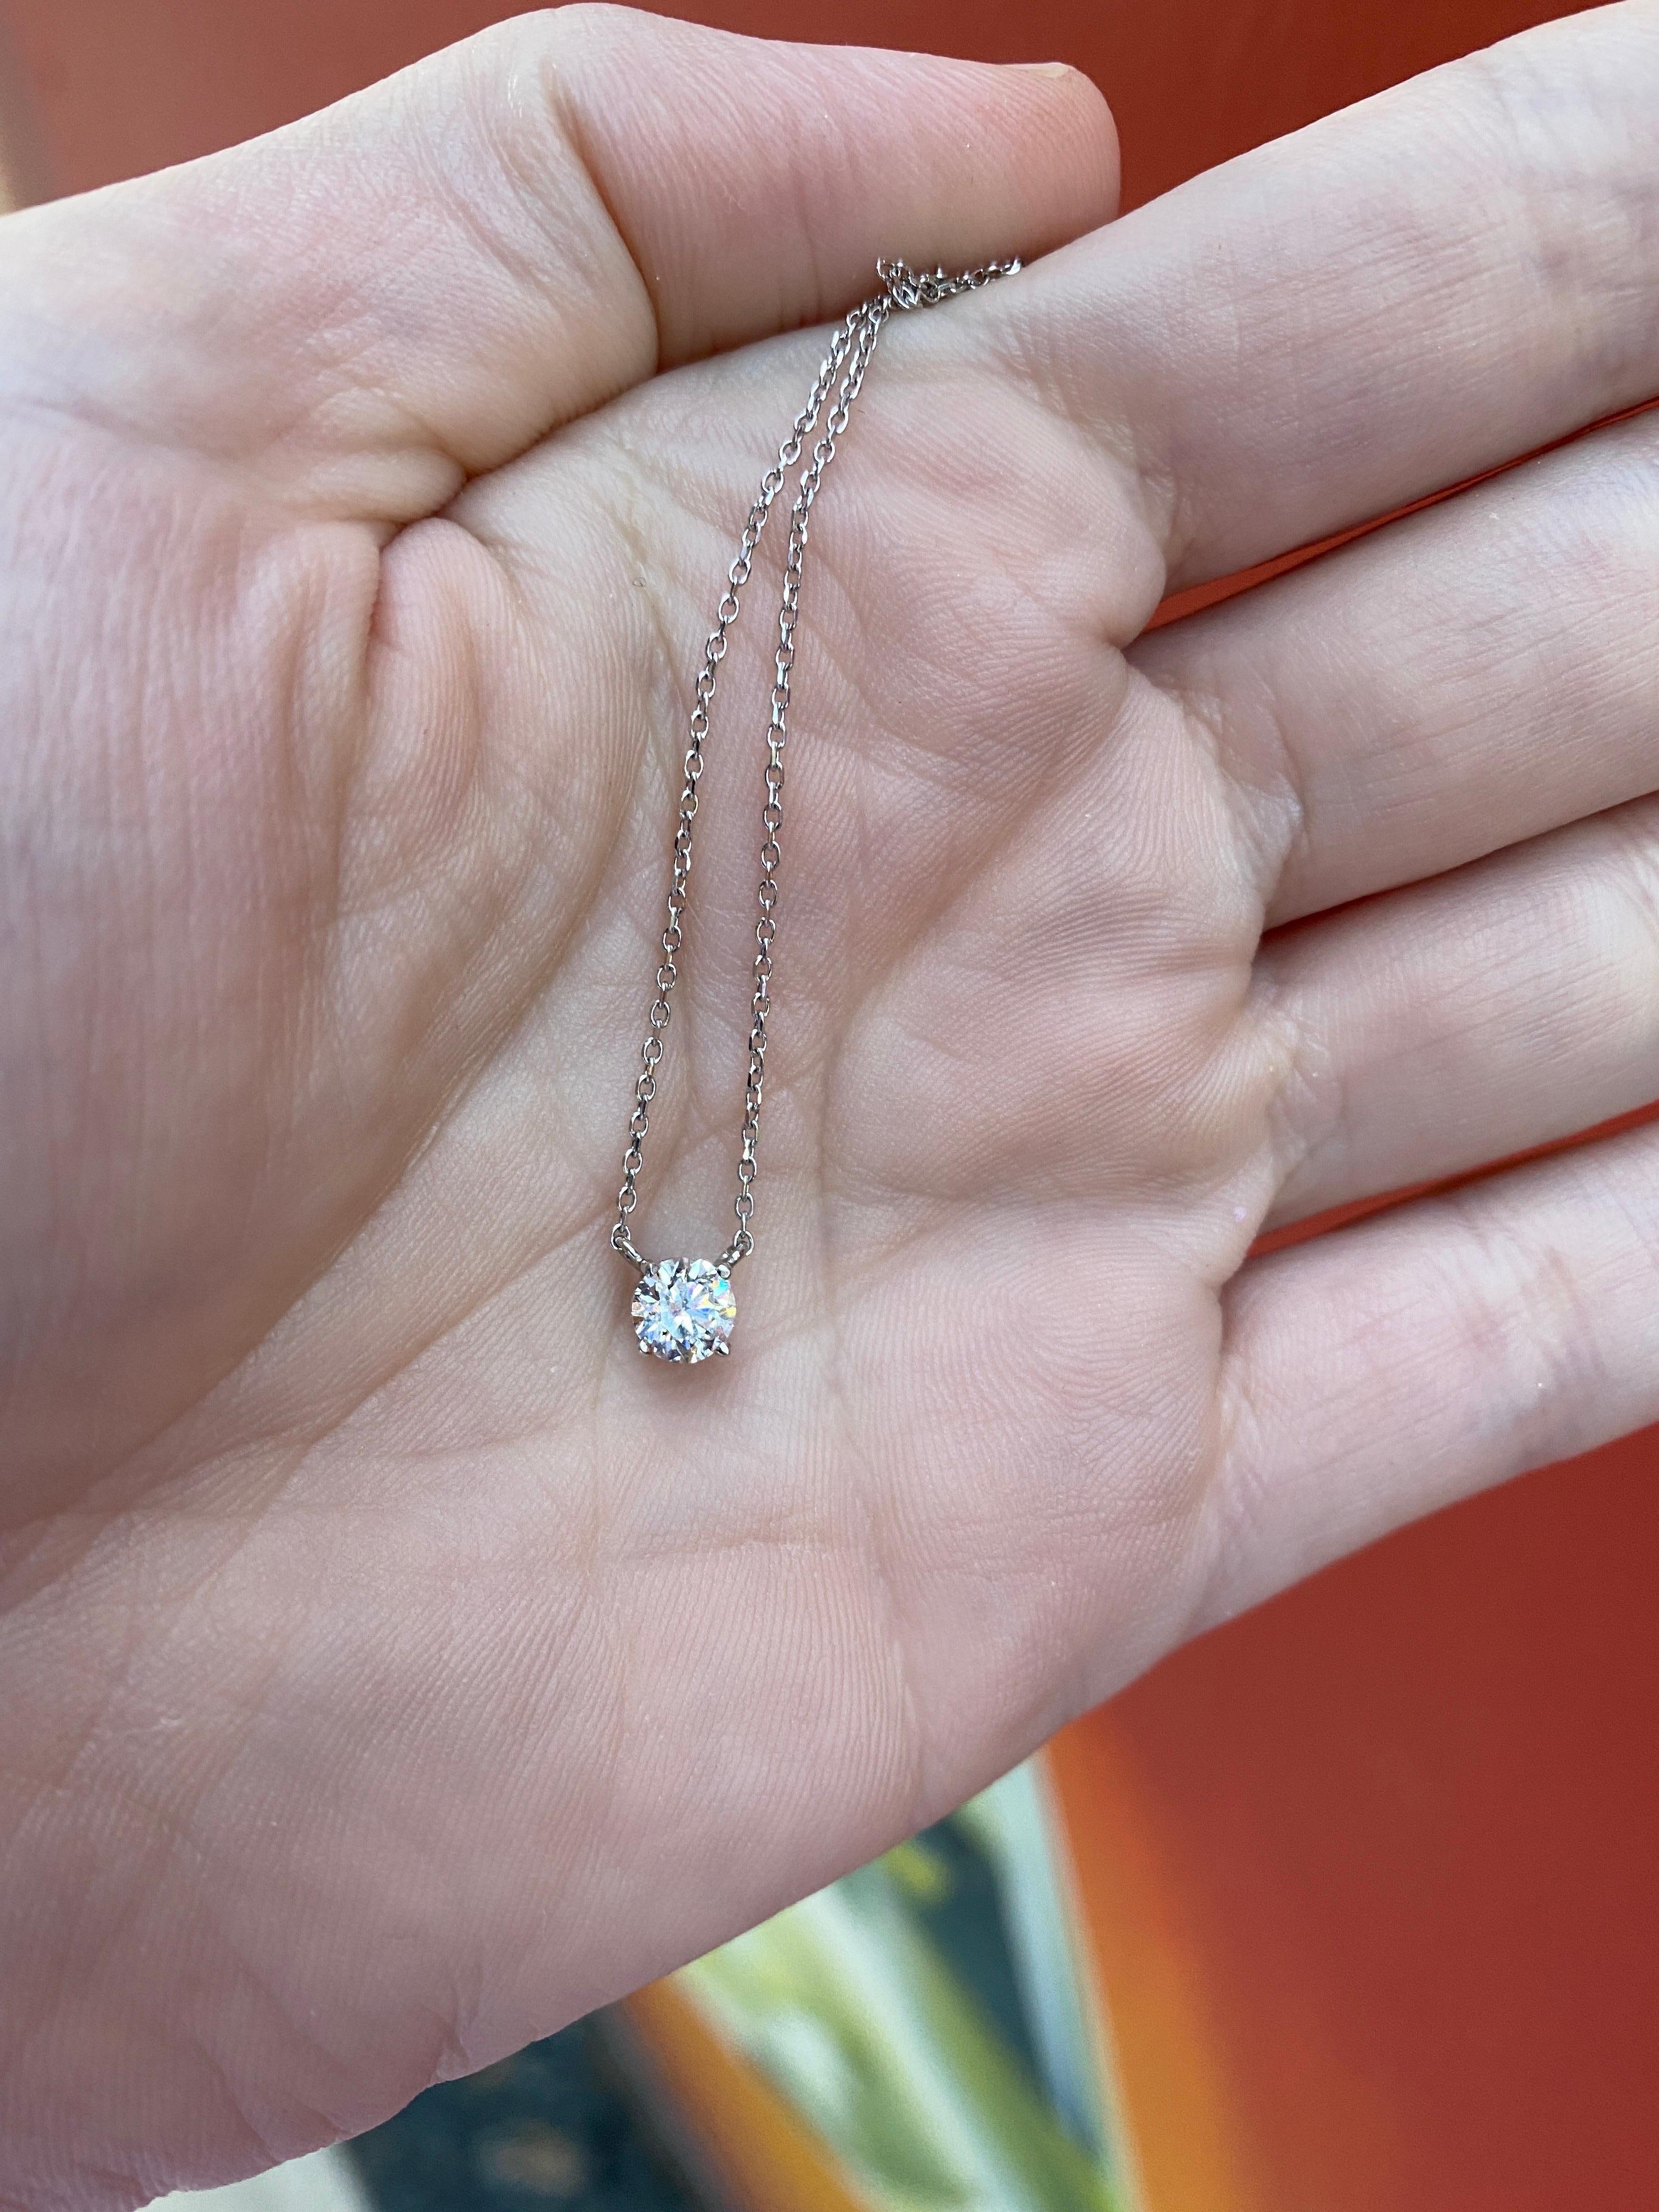 0.50 Carat Round Natural Diamond, H-I SI2, 14 Karat White Gold Pendant Necklace In New Condition For Sale In Houston, TX